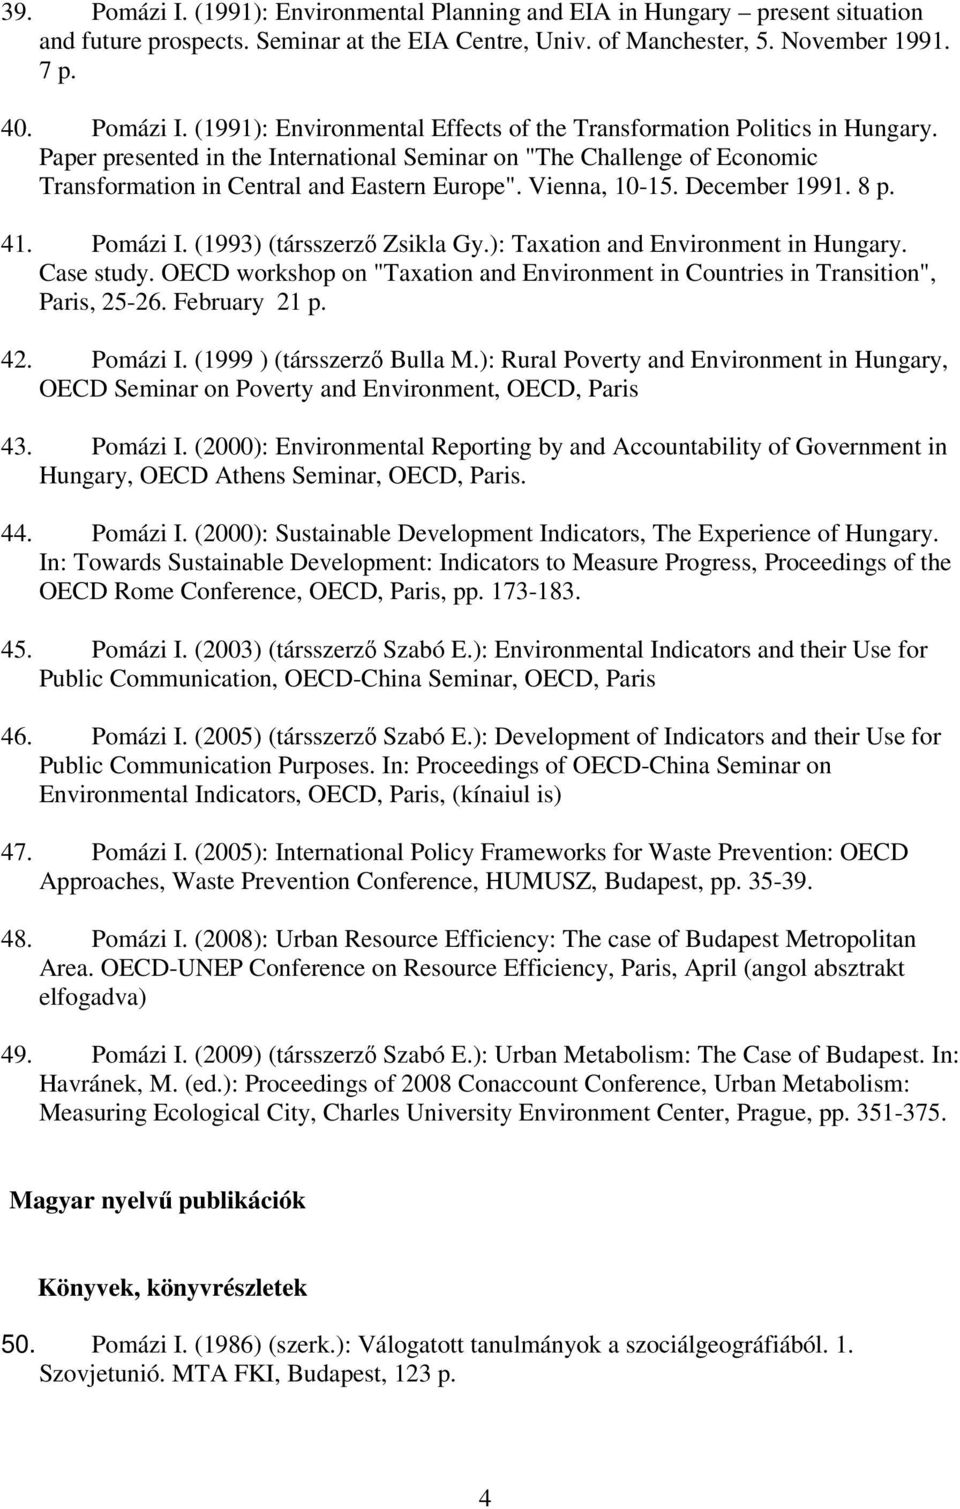 ): Taxation and Environment in Hungary. Case study. OECD workshop on "Taxation and Environment in Countries in Transition", Paris, 25-26. February 21 p. 42. Pomázi I. (1999 ) (társszerző Bulla M.